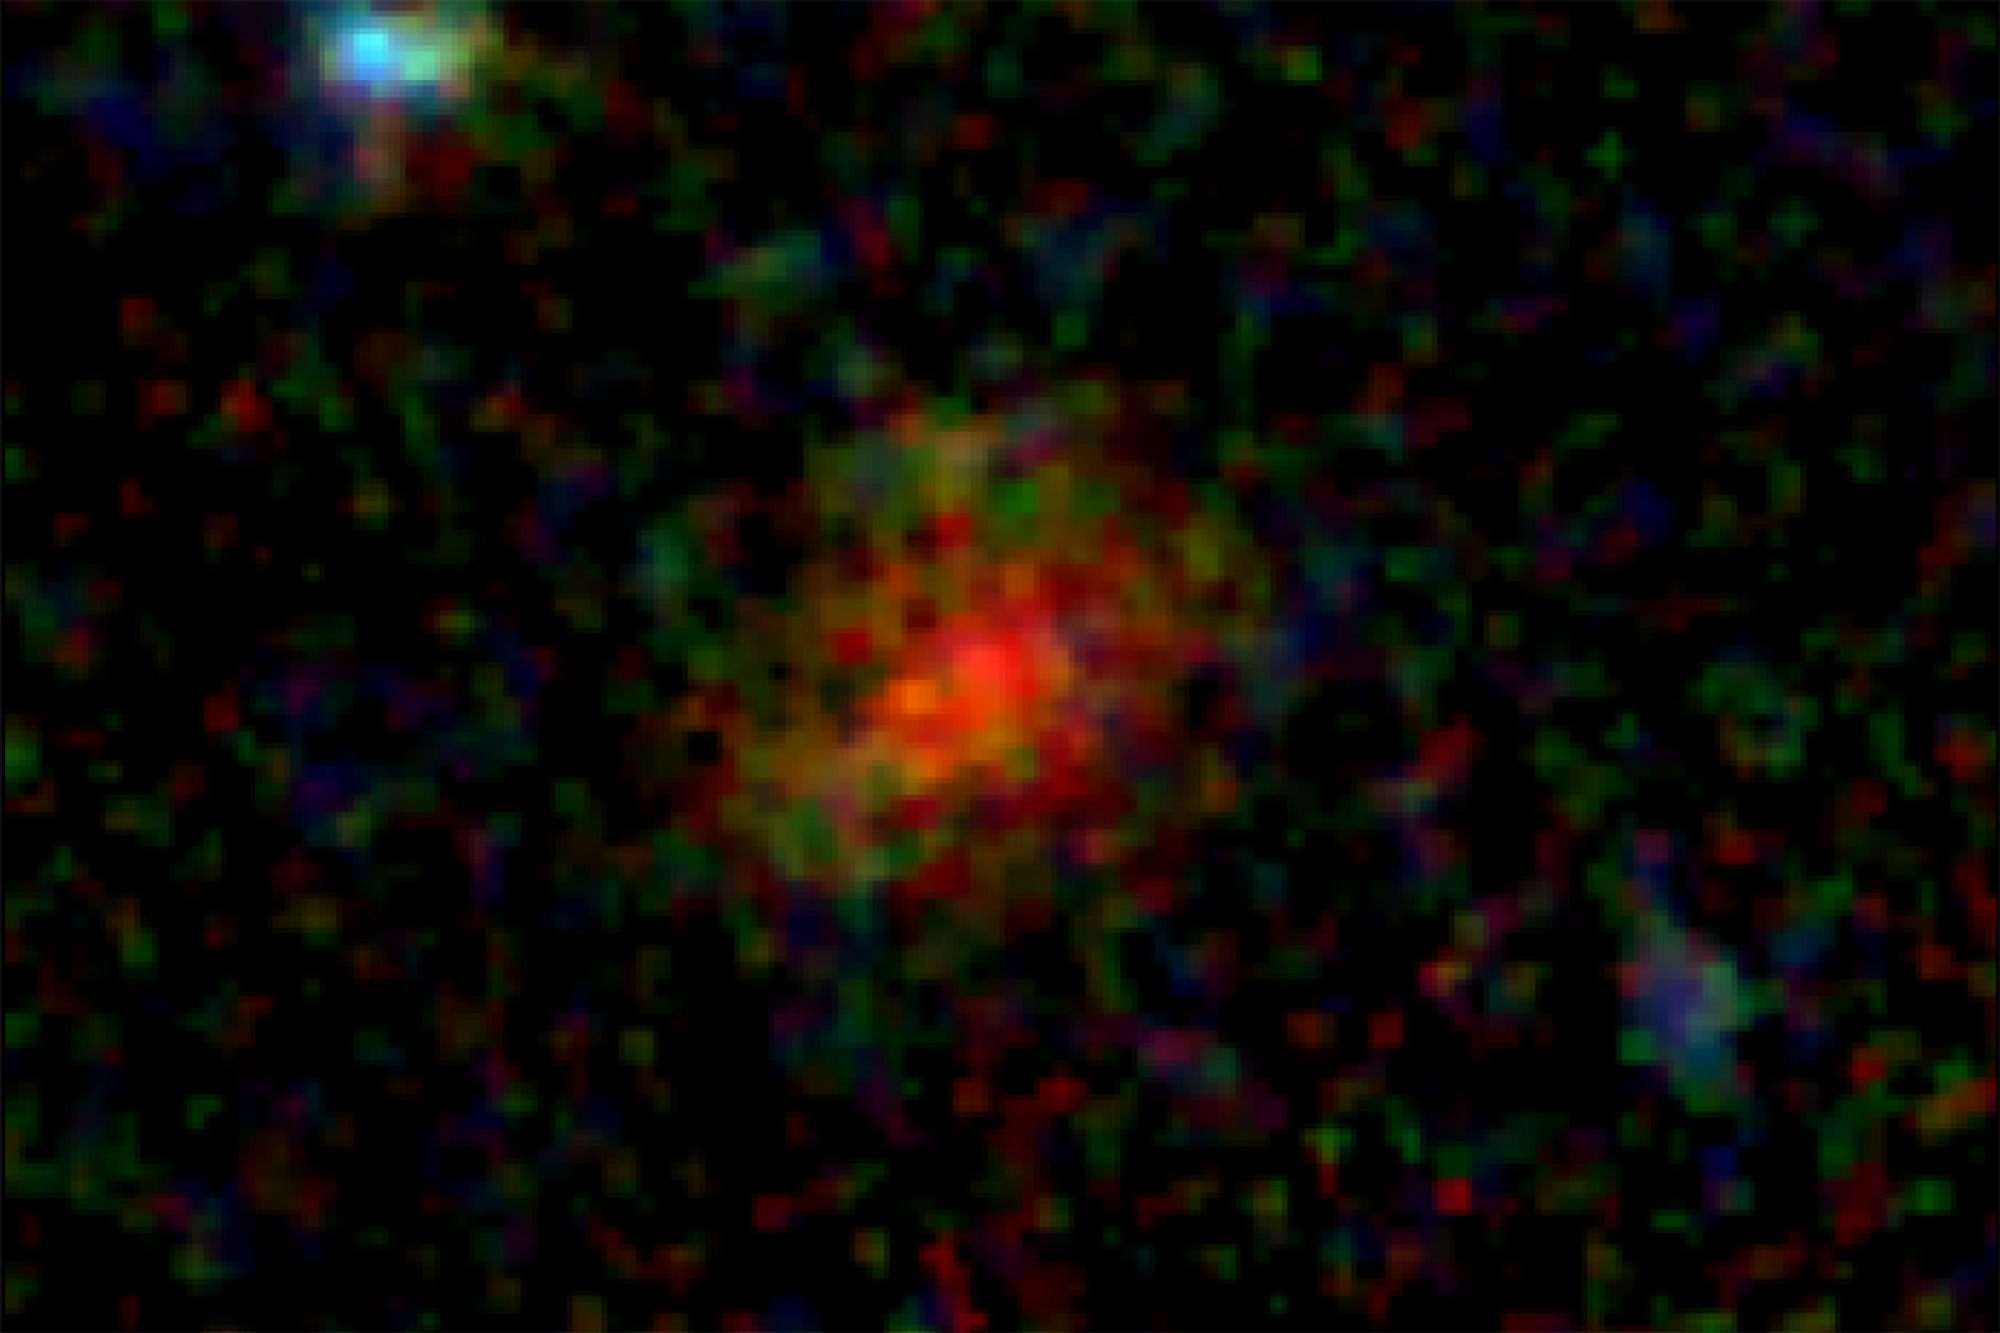 Webb finding a dusty star-forming galaxy in the early universe